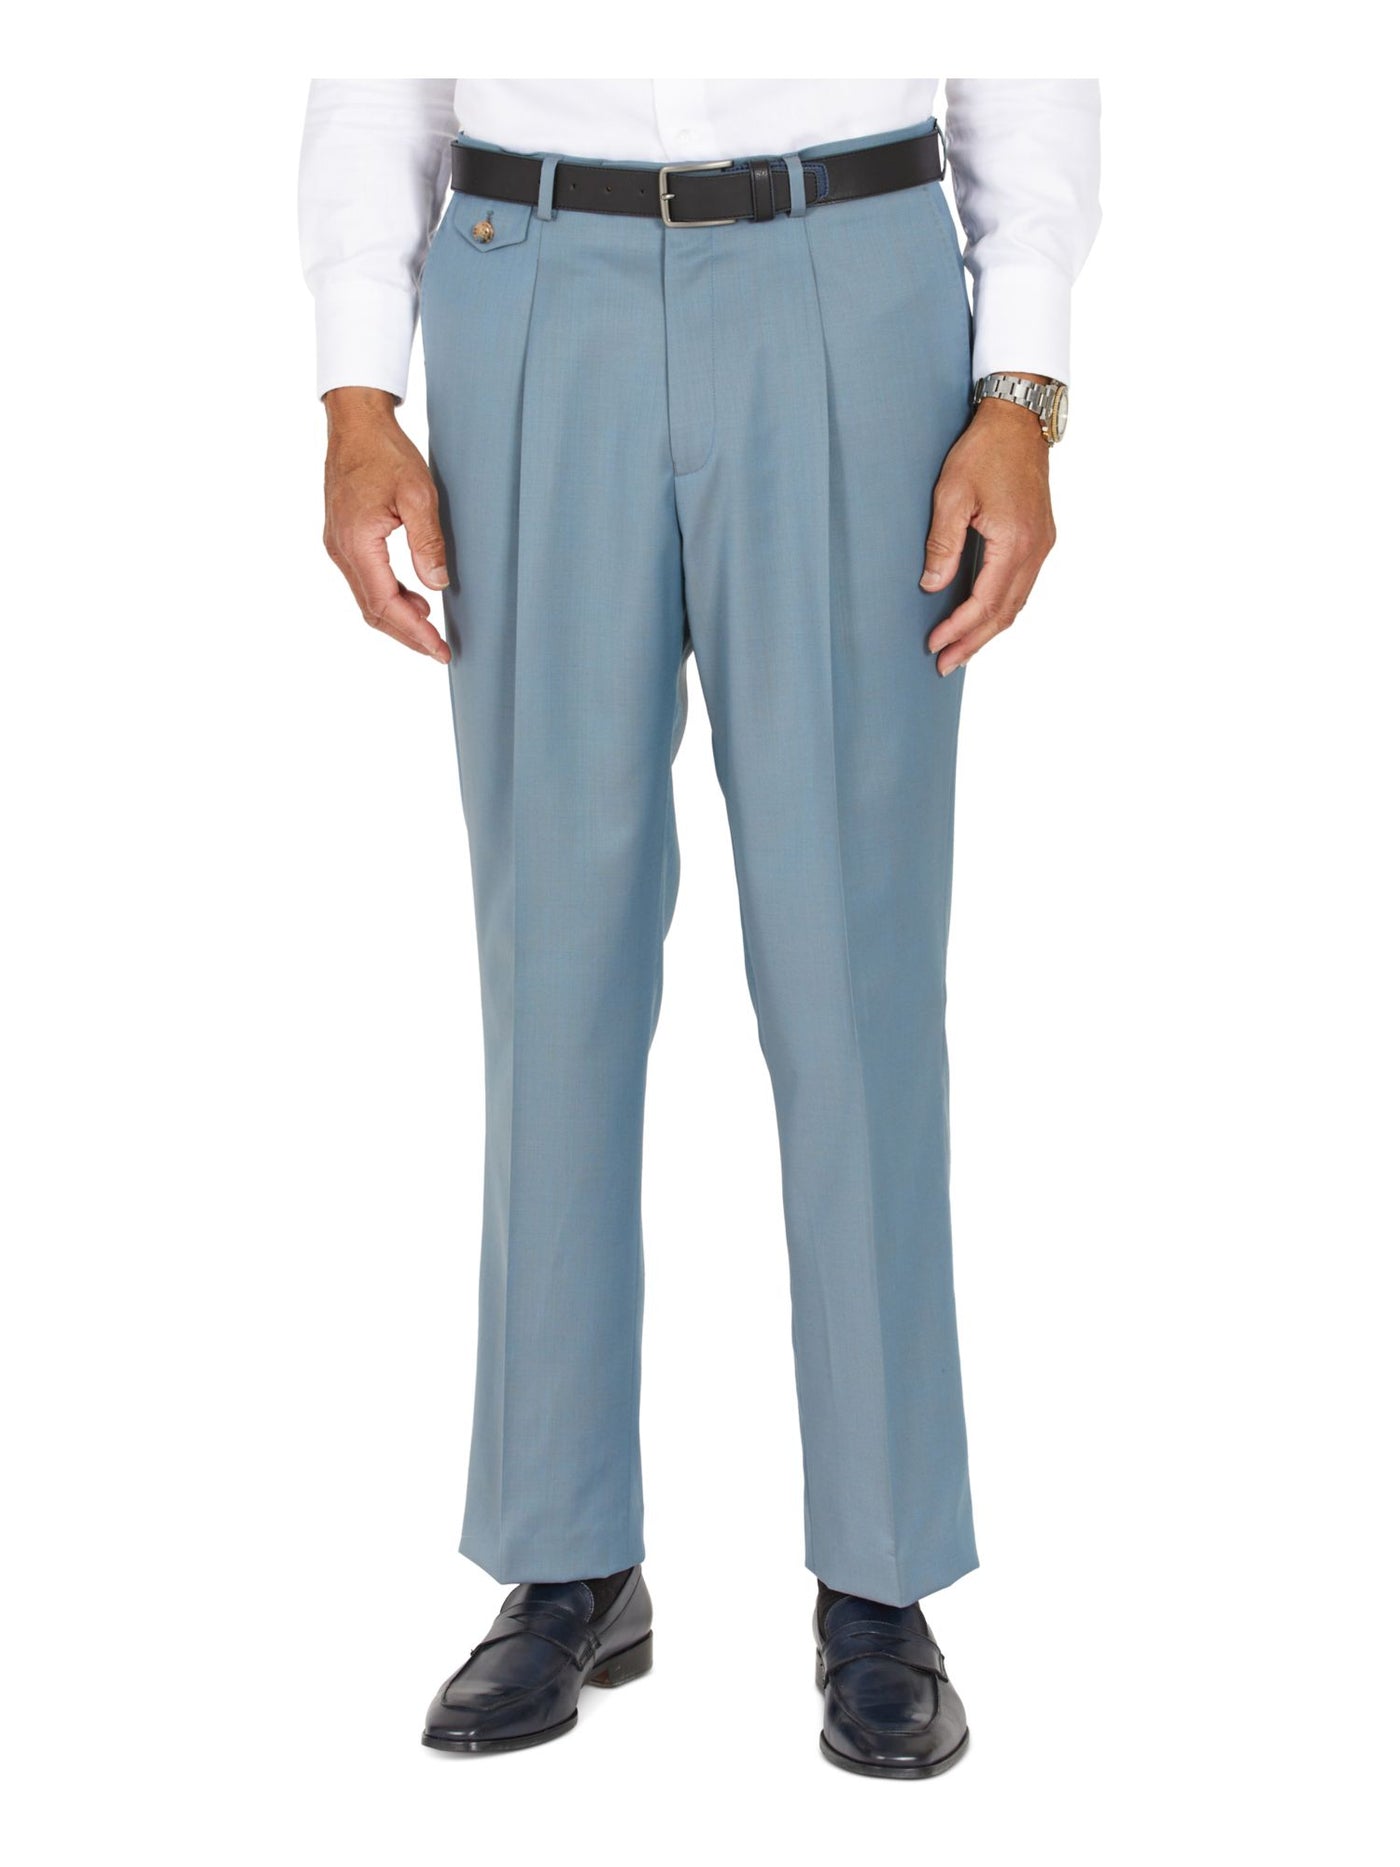 TAYION BY MONTEE HOLLAND Mens Teal Pleated, Classic Fit Stretch Suit Separate Pants 30 X 32